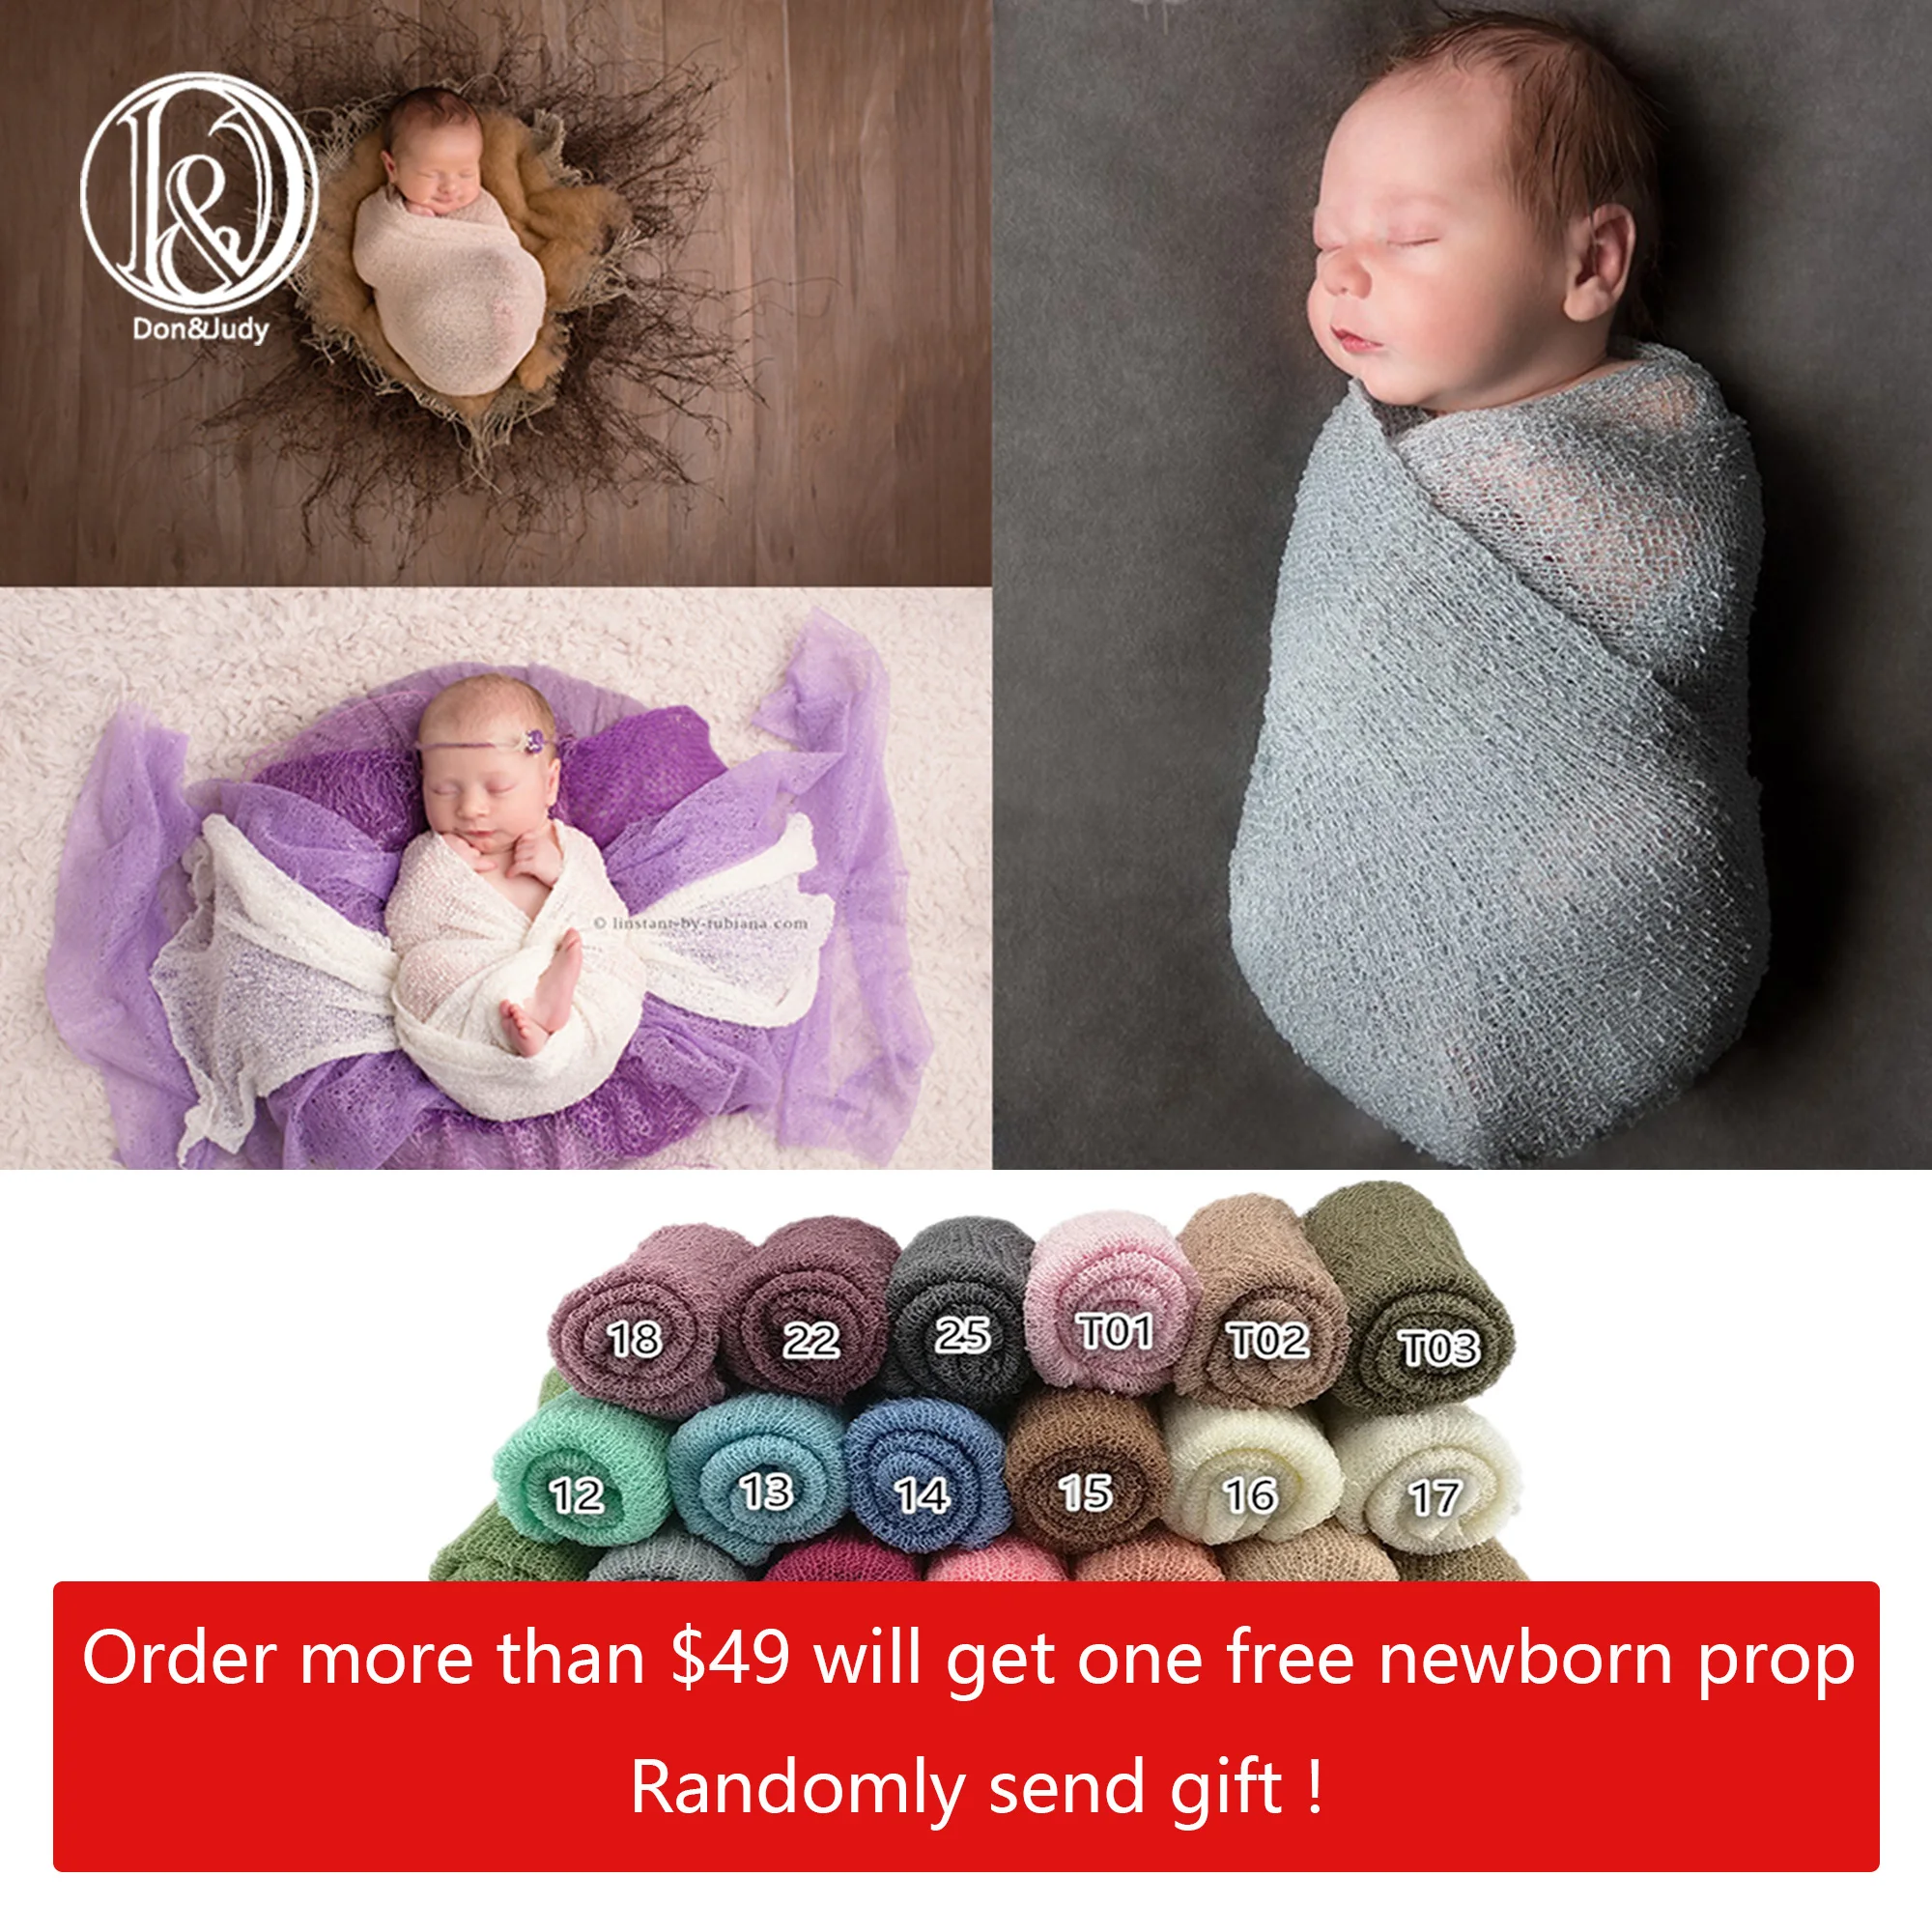 Soft Knit Stretchy Wraps Swaddle For Newborn Baby Photography Props Kids Receiving Blankets Cloth Accessories For Photo Shooting 2021 new newborn photography props christmas red outfit hat knit soft set for baby boy girl clothing photo shooting accessories